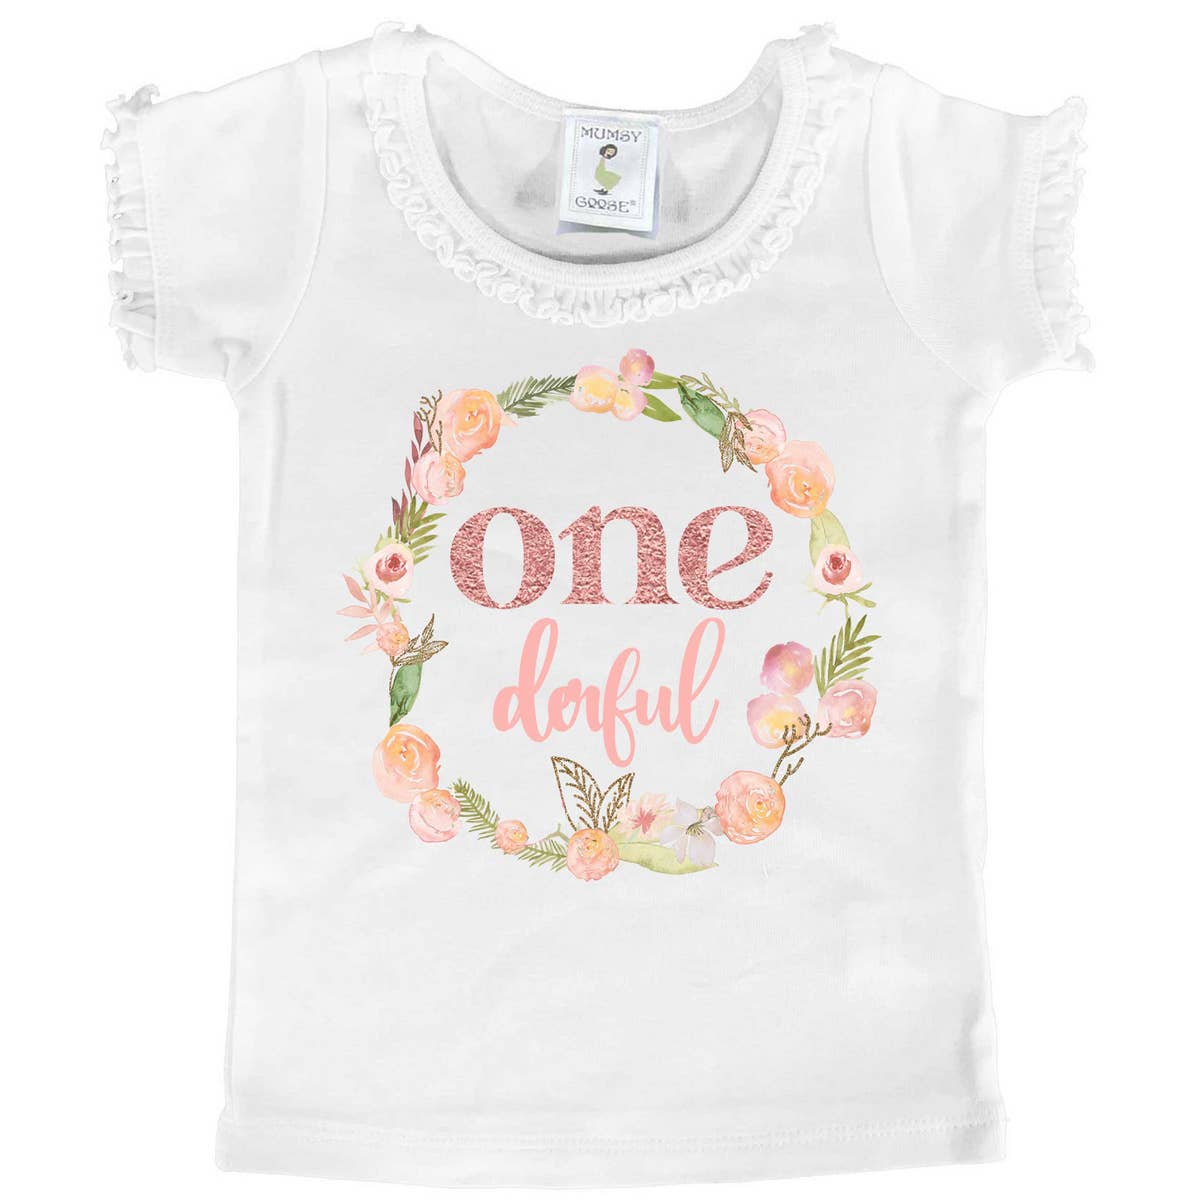 "ONEderful" First Birthday Tee - Mumsy Goose